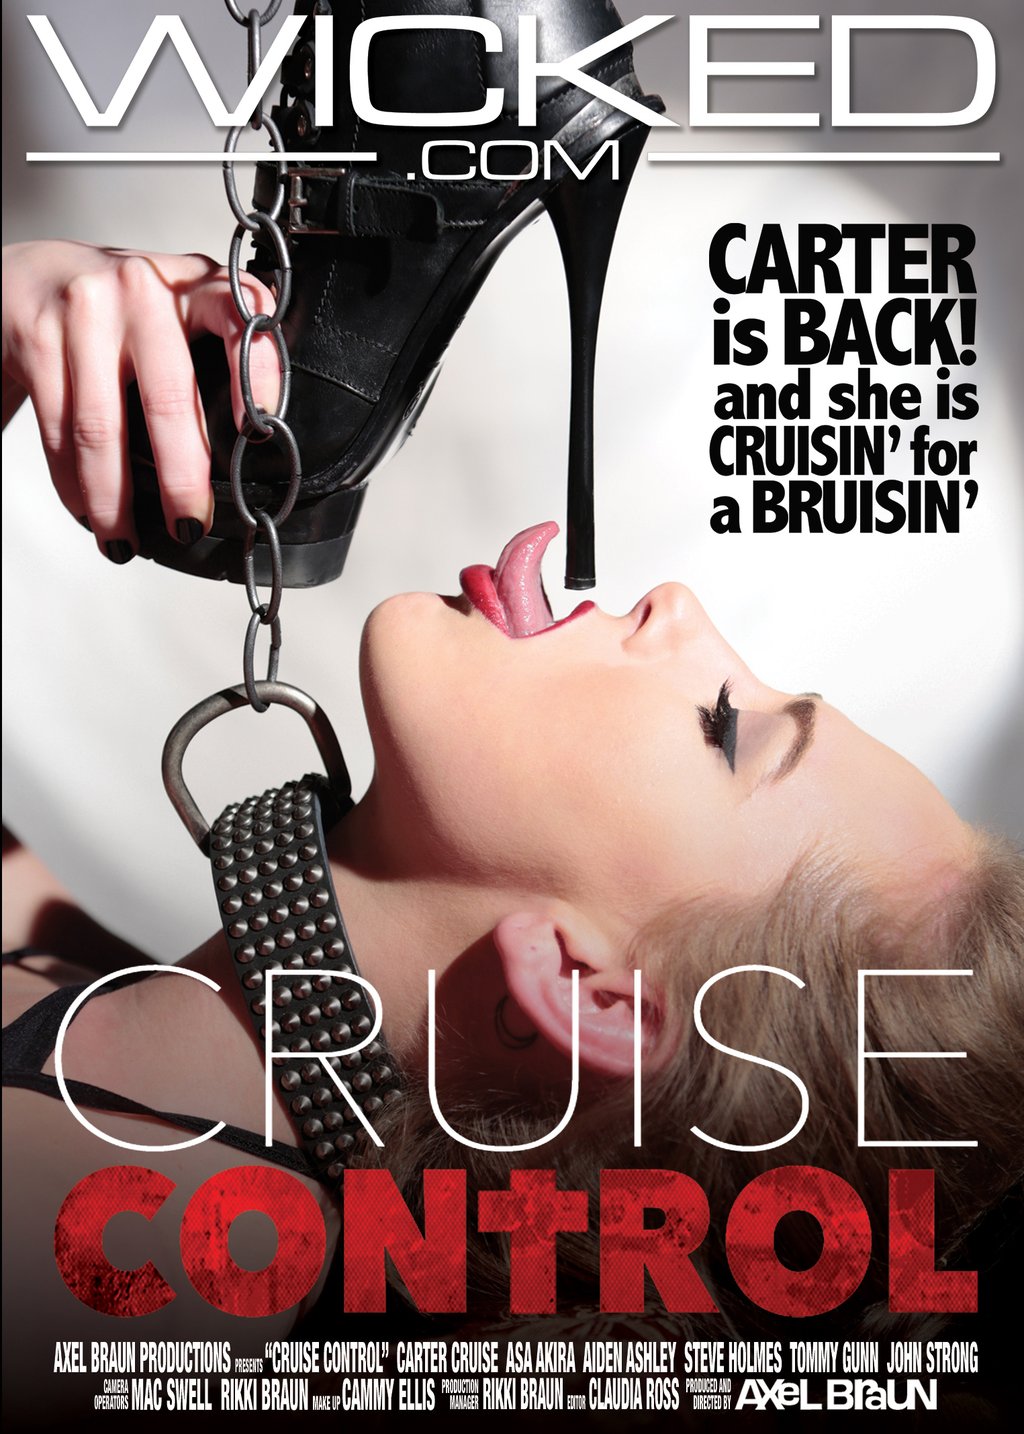 Cruise Control (Axel Braun, Wicked Pictures)